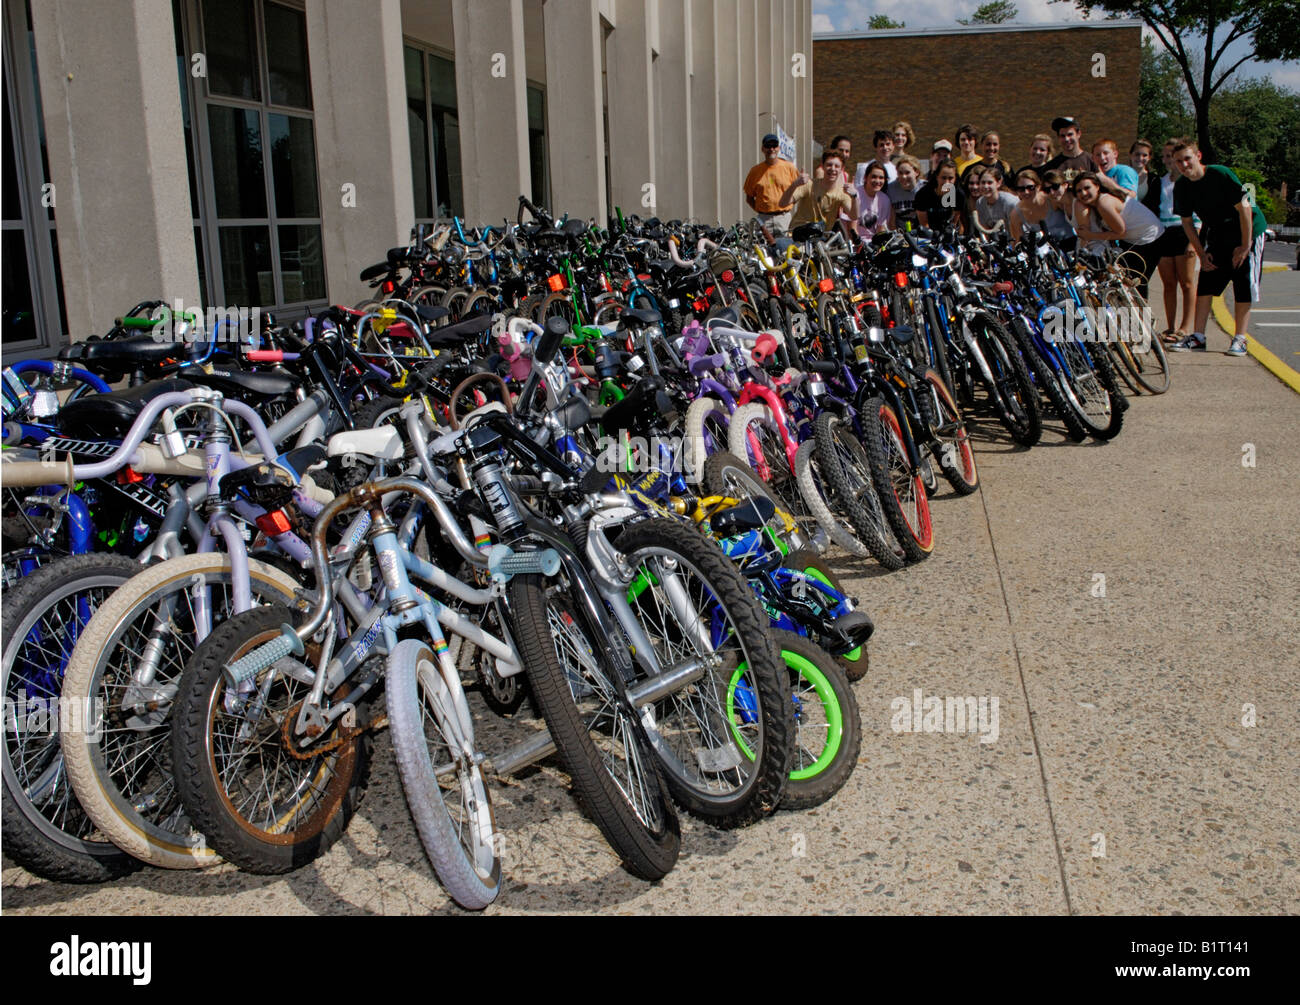 High school environment club, teens, volunteering at bike recycling collection, posing with the day's collection. Stock Photo